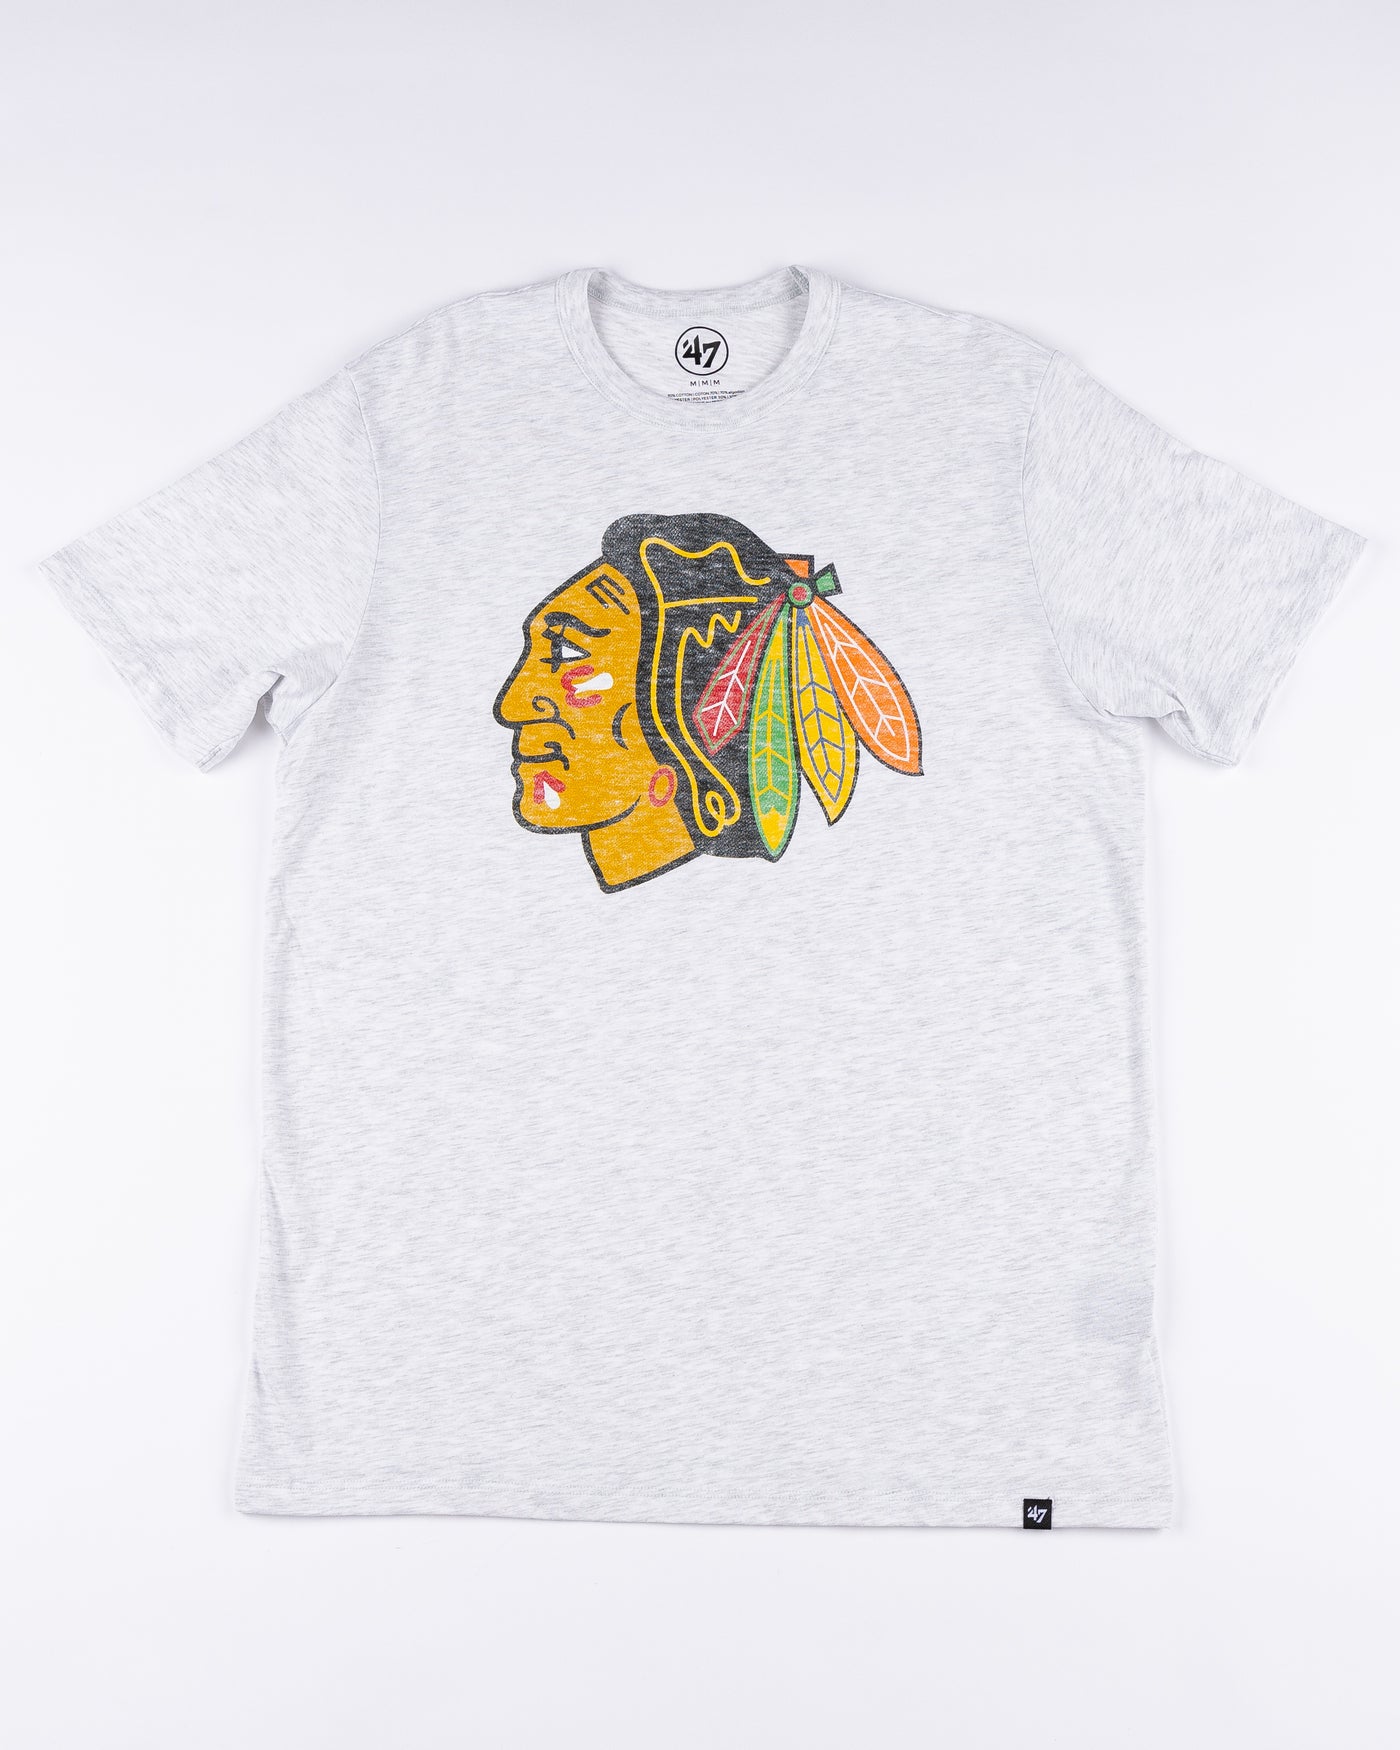 grey '47 brand tee with vintage distressed Chicago Blackhawks primary logo across chest - front lay flat